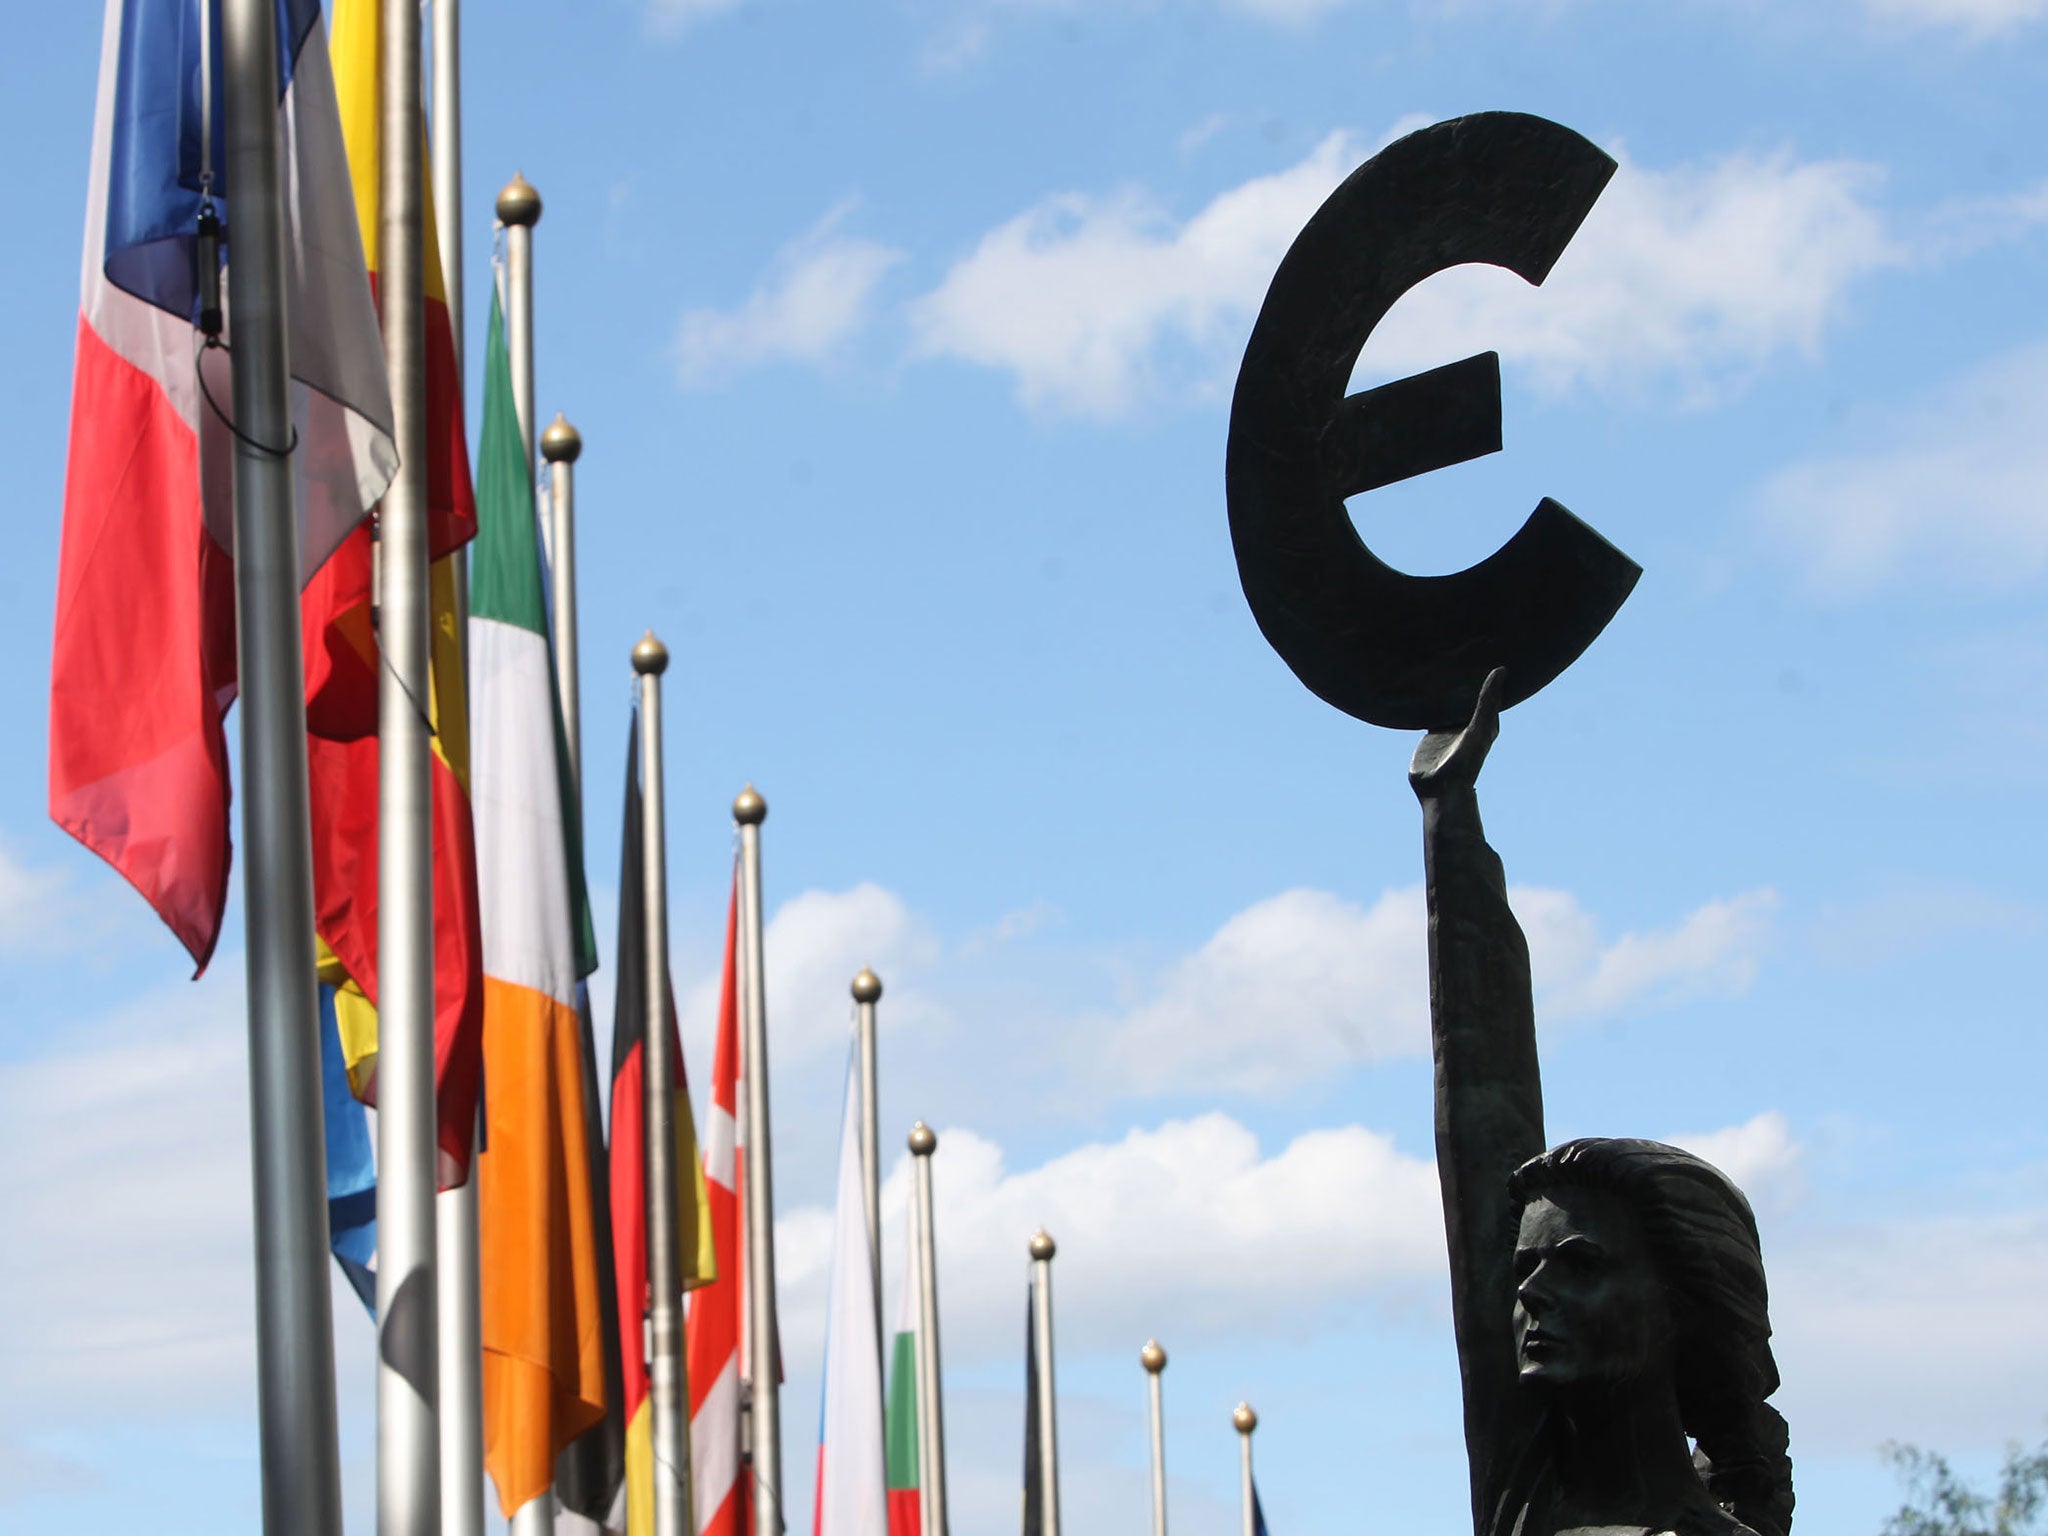 A statue holding the symbol of the Euro, the European common currency, stands in front of the European Parliament building